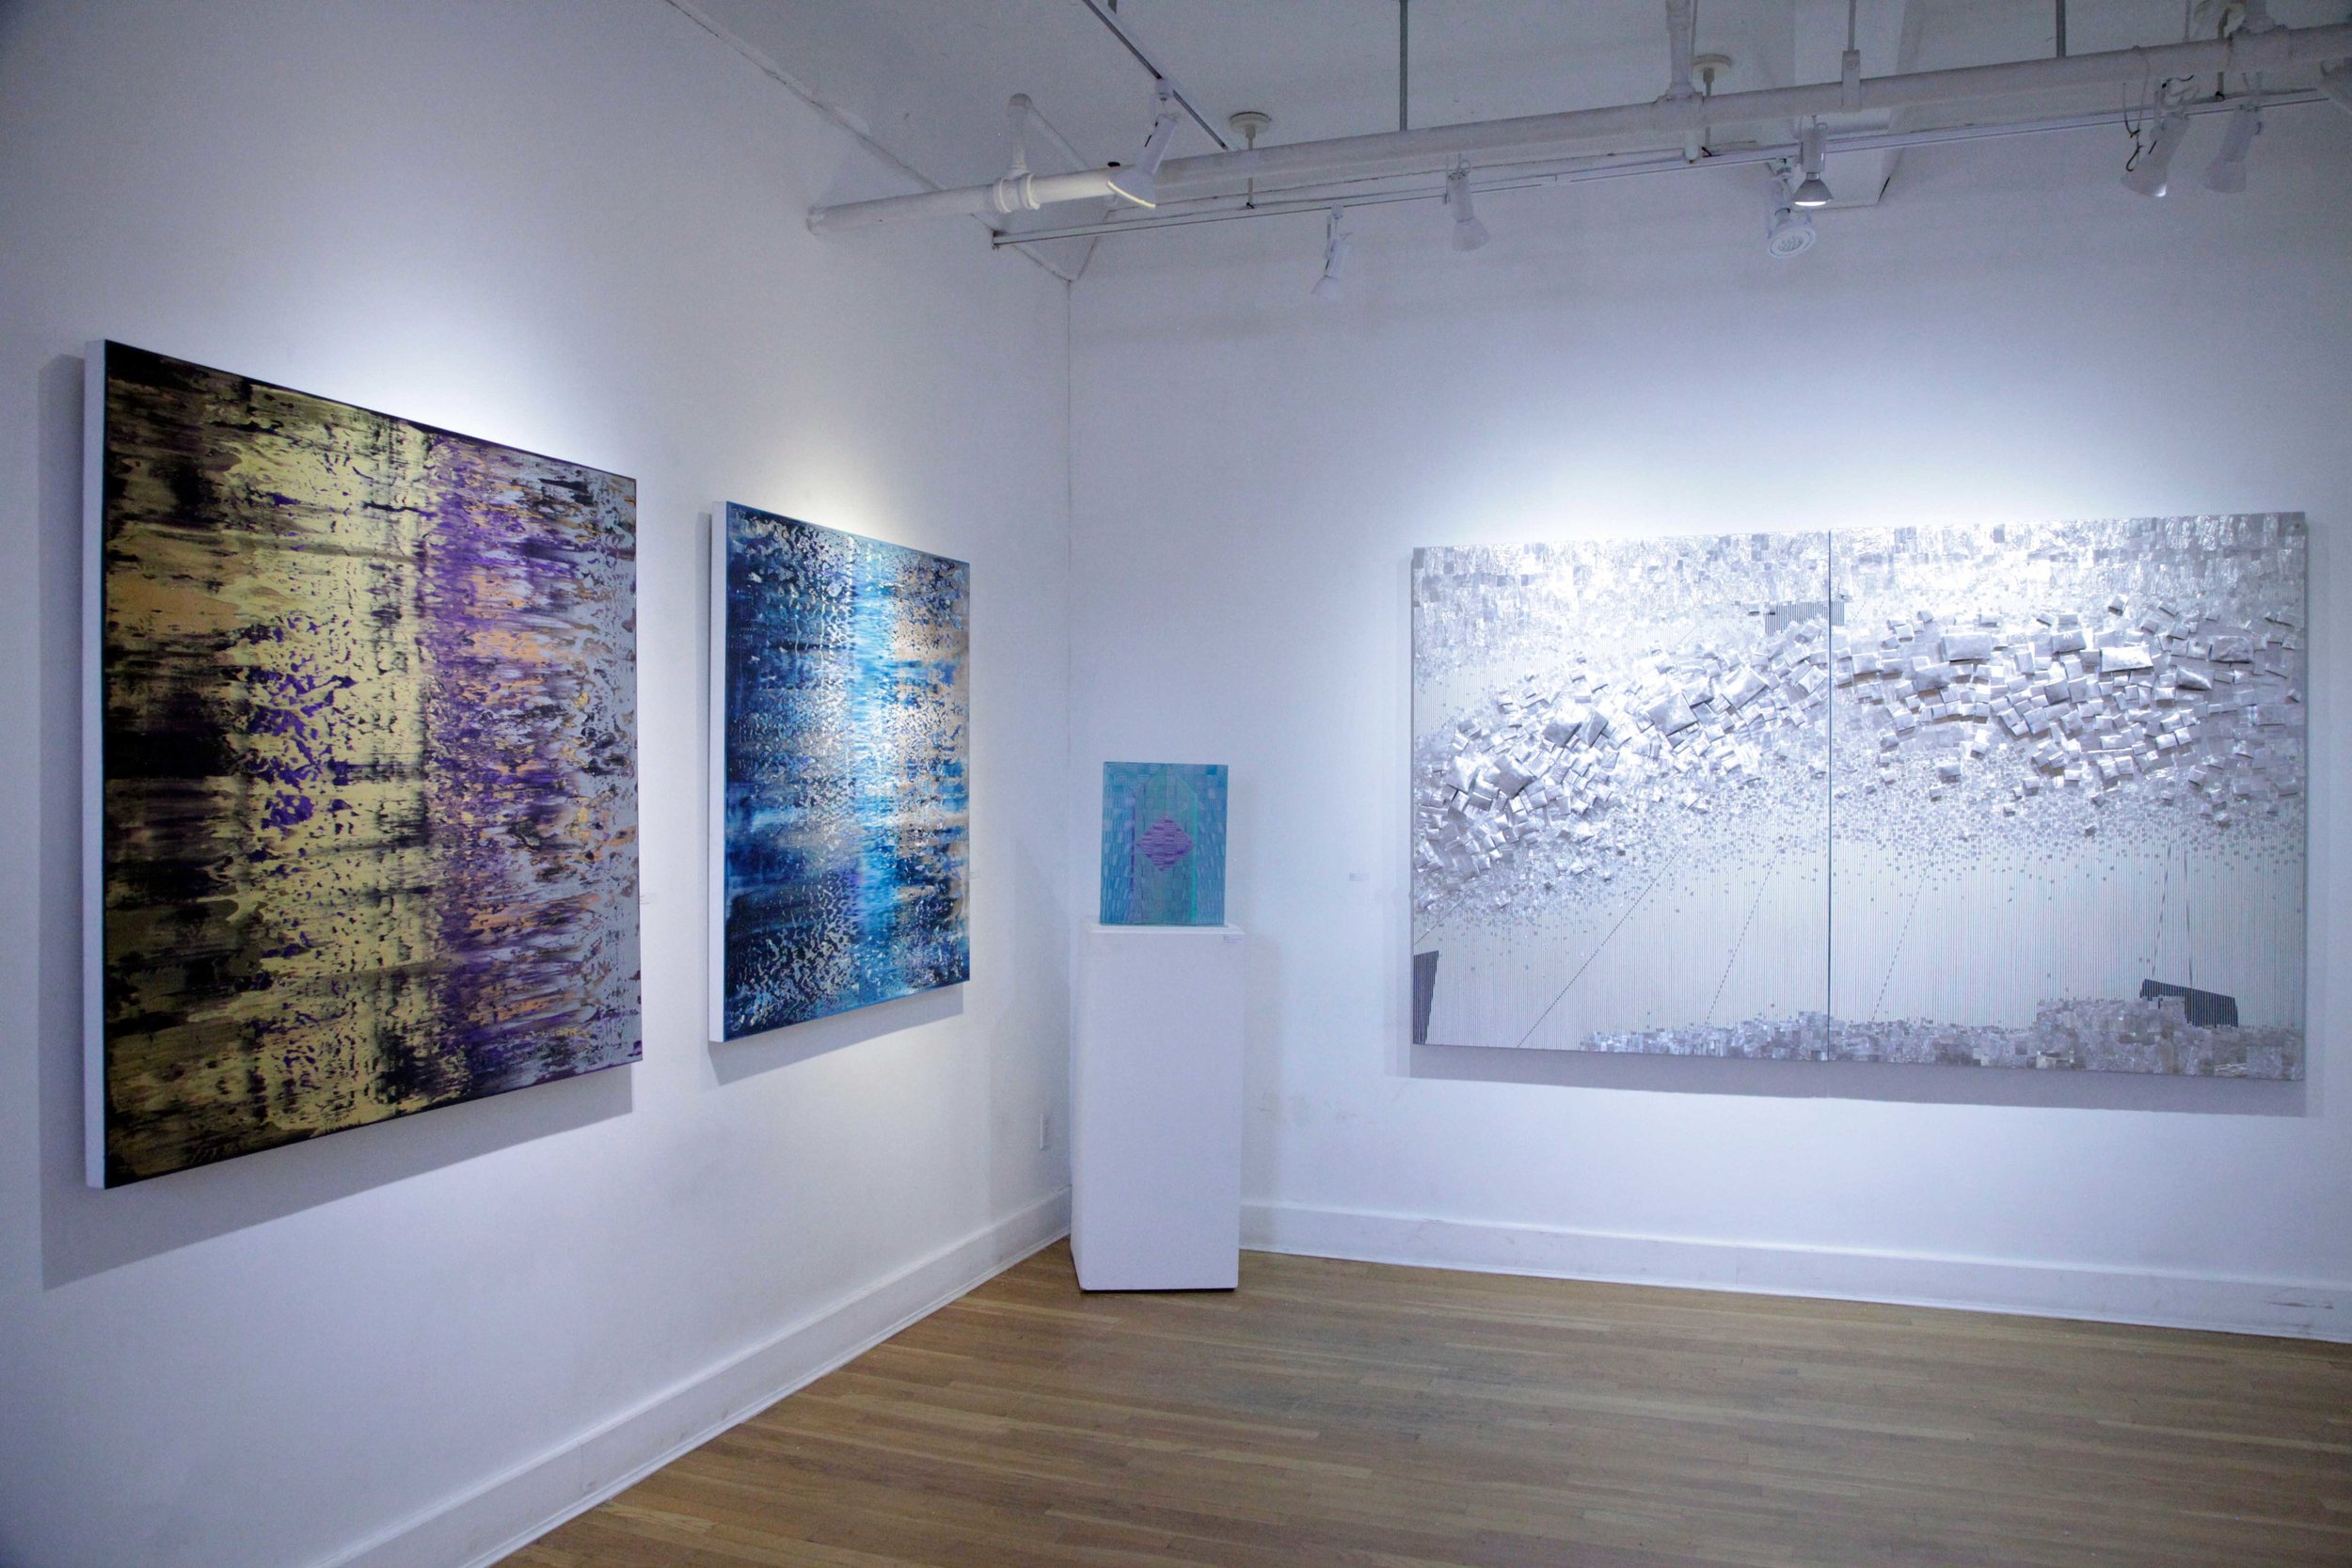  Donghwa Ode Gallery Spring Benefit Exhibition New York, U.S.A. 